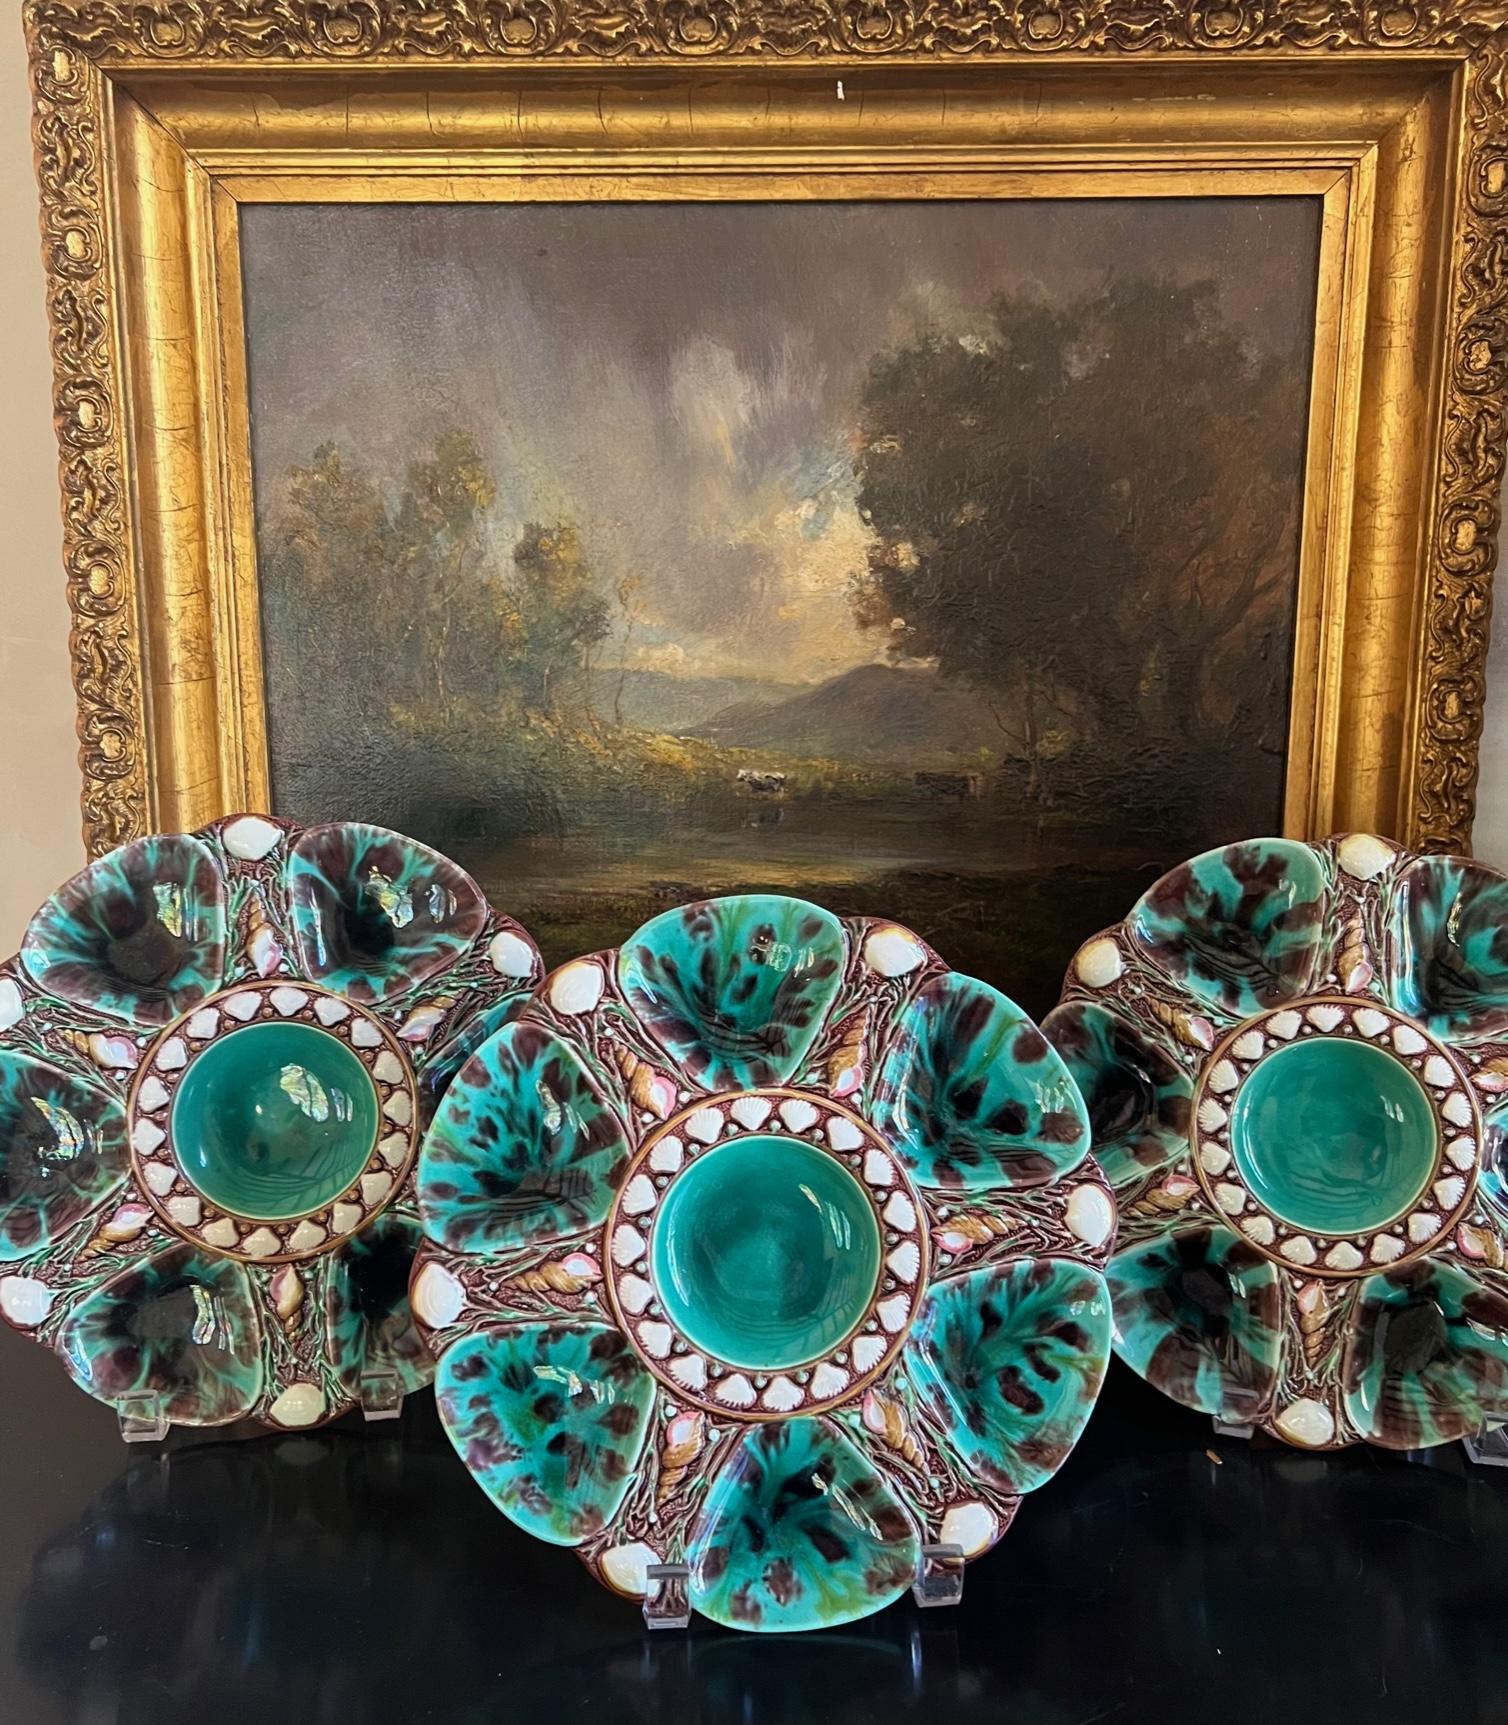 Antique Minton Green Majolica Oyster Plate, circa 1860's-1870's For Sale 7